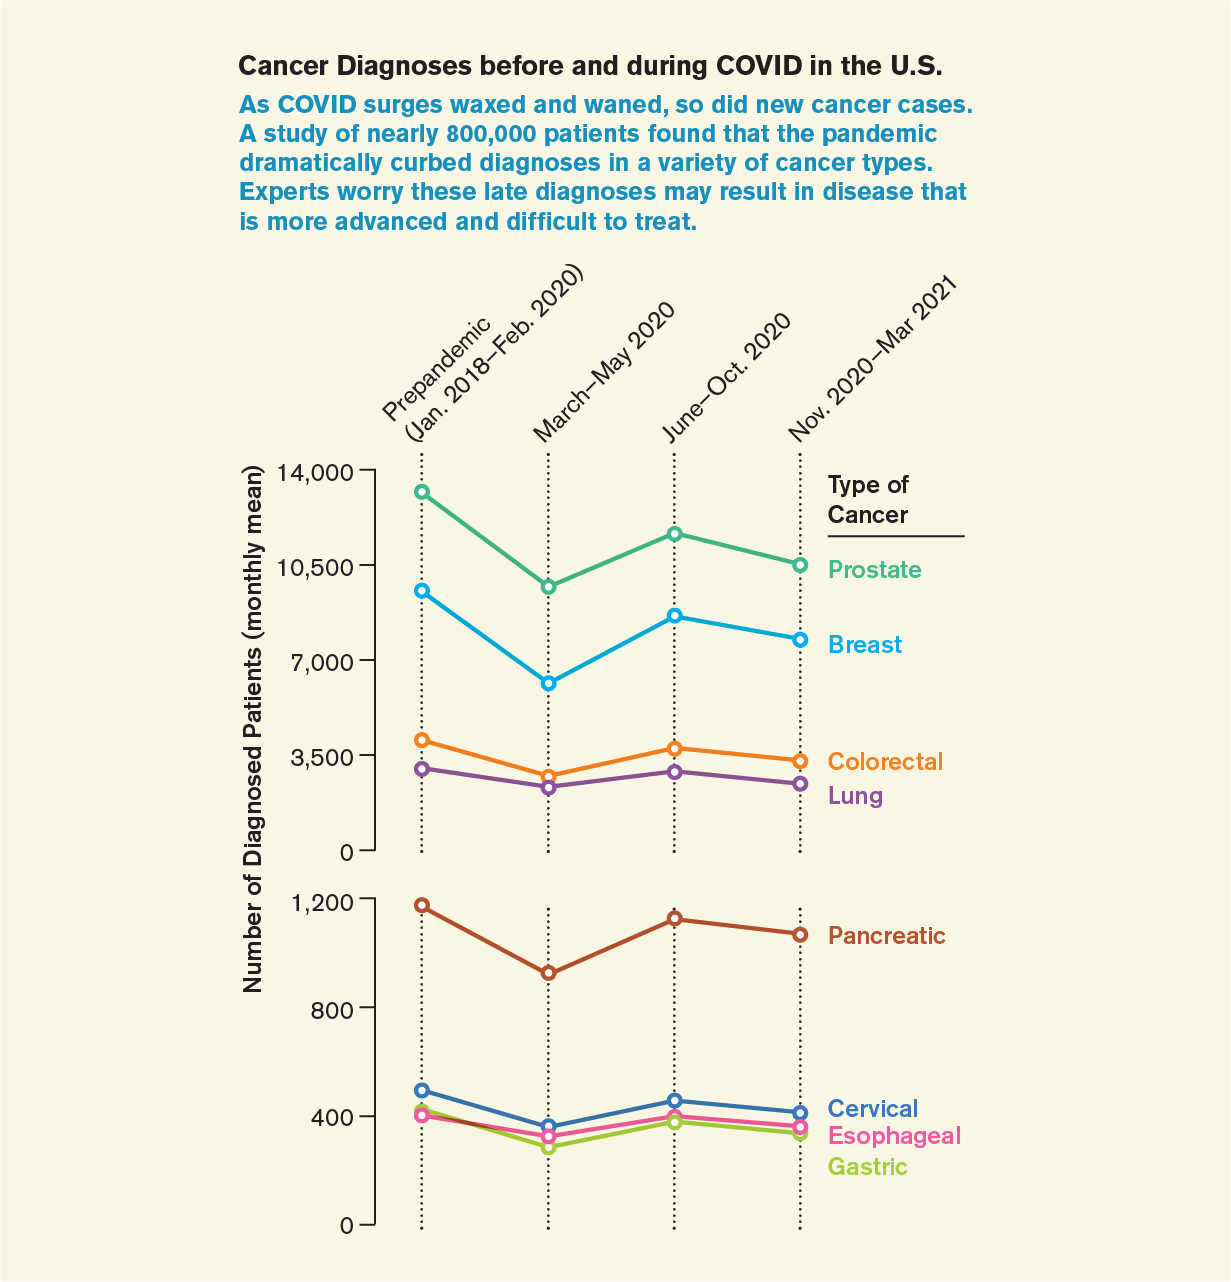 Line chart shows average monthly diagnoses of various types of cancer in the U.S. before and during the COVID pandemic.